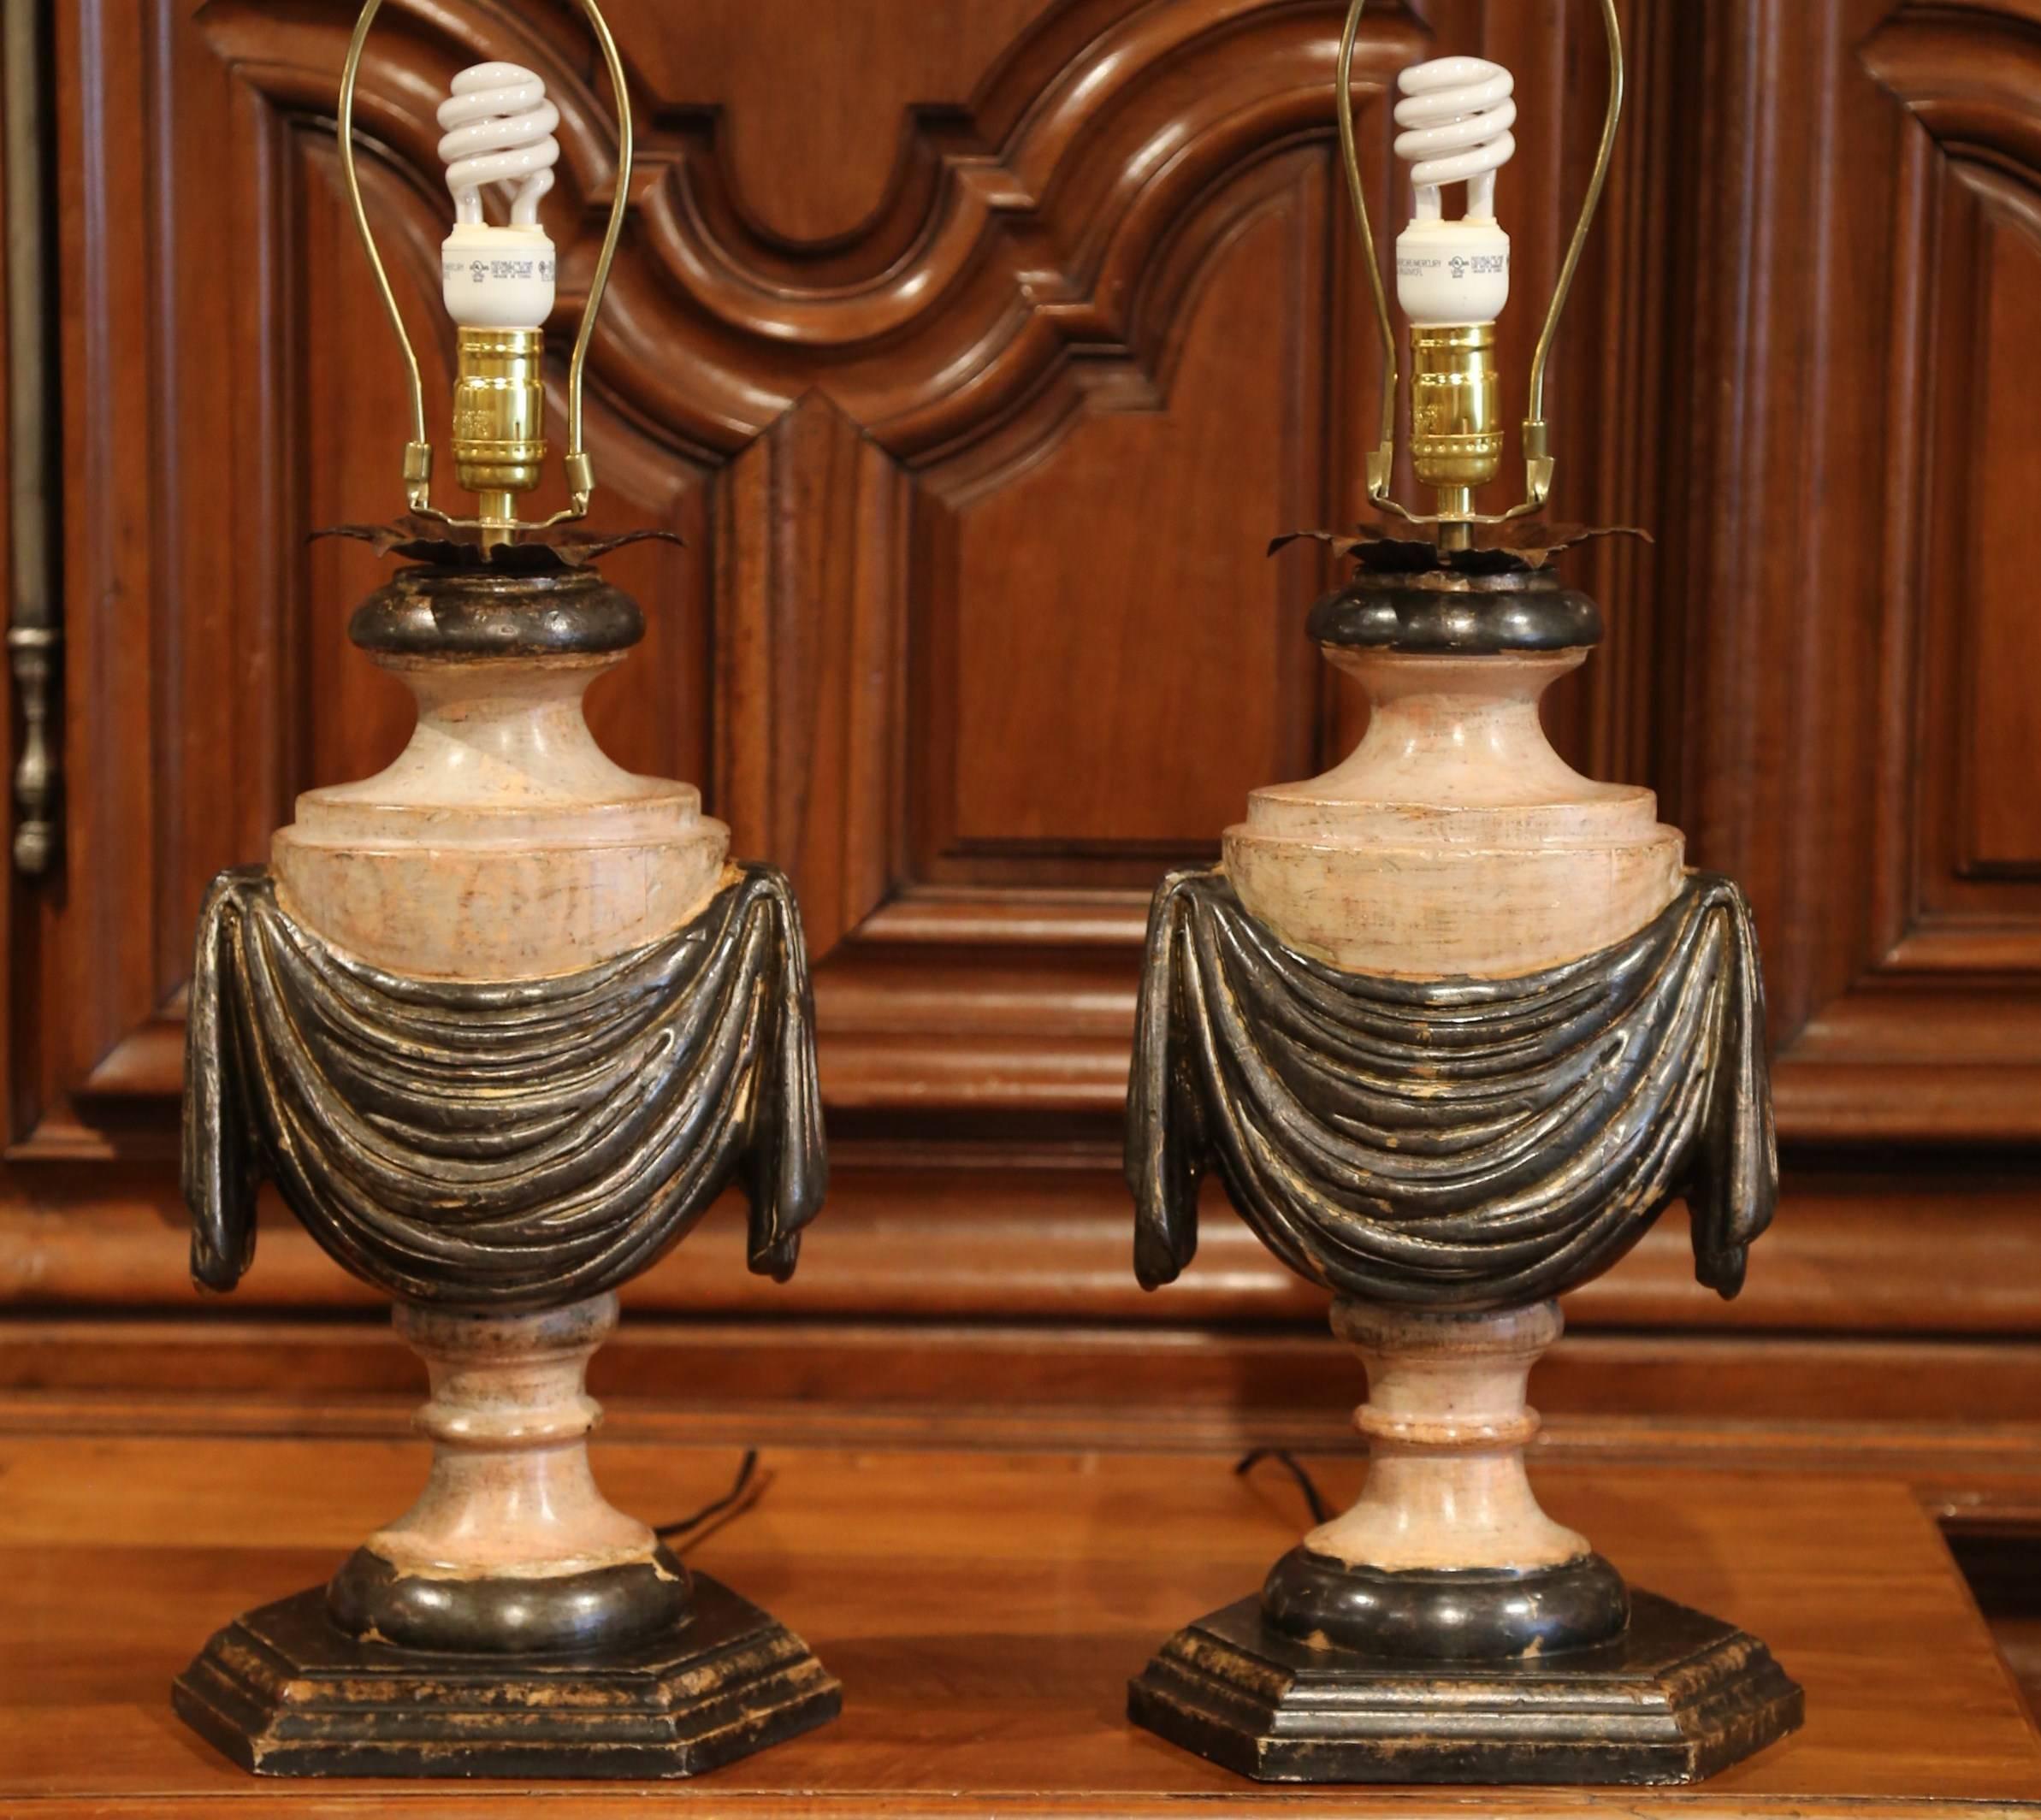 Incorporate extra light into a living room or bedroom with this pair of hand-carved and hand-painted wood lamp bases from Italy. The bases are in the shape of a traditional antique urn with hand-carved swags and sit on a hexagonal base. Both table